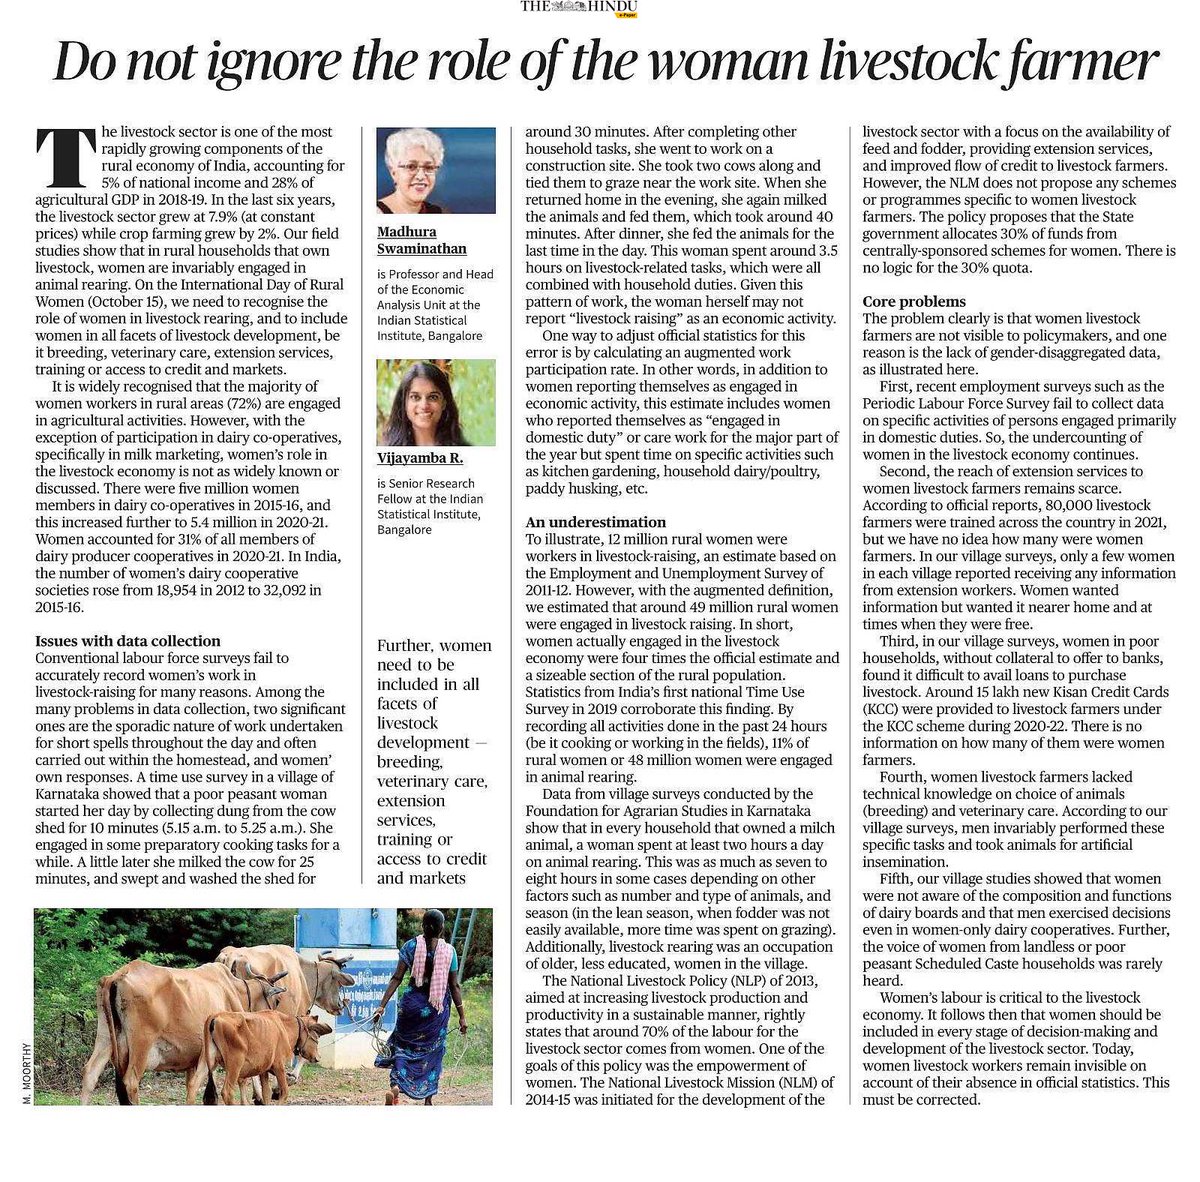 Women’s labour is critical to the livestock economy. An estimated 49 million women are involved in livestock raising in India. Their invisibility in official statistics must end & they must have a say in decision-making & development of the sector. thehindu.com/opinion/lead/d…